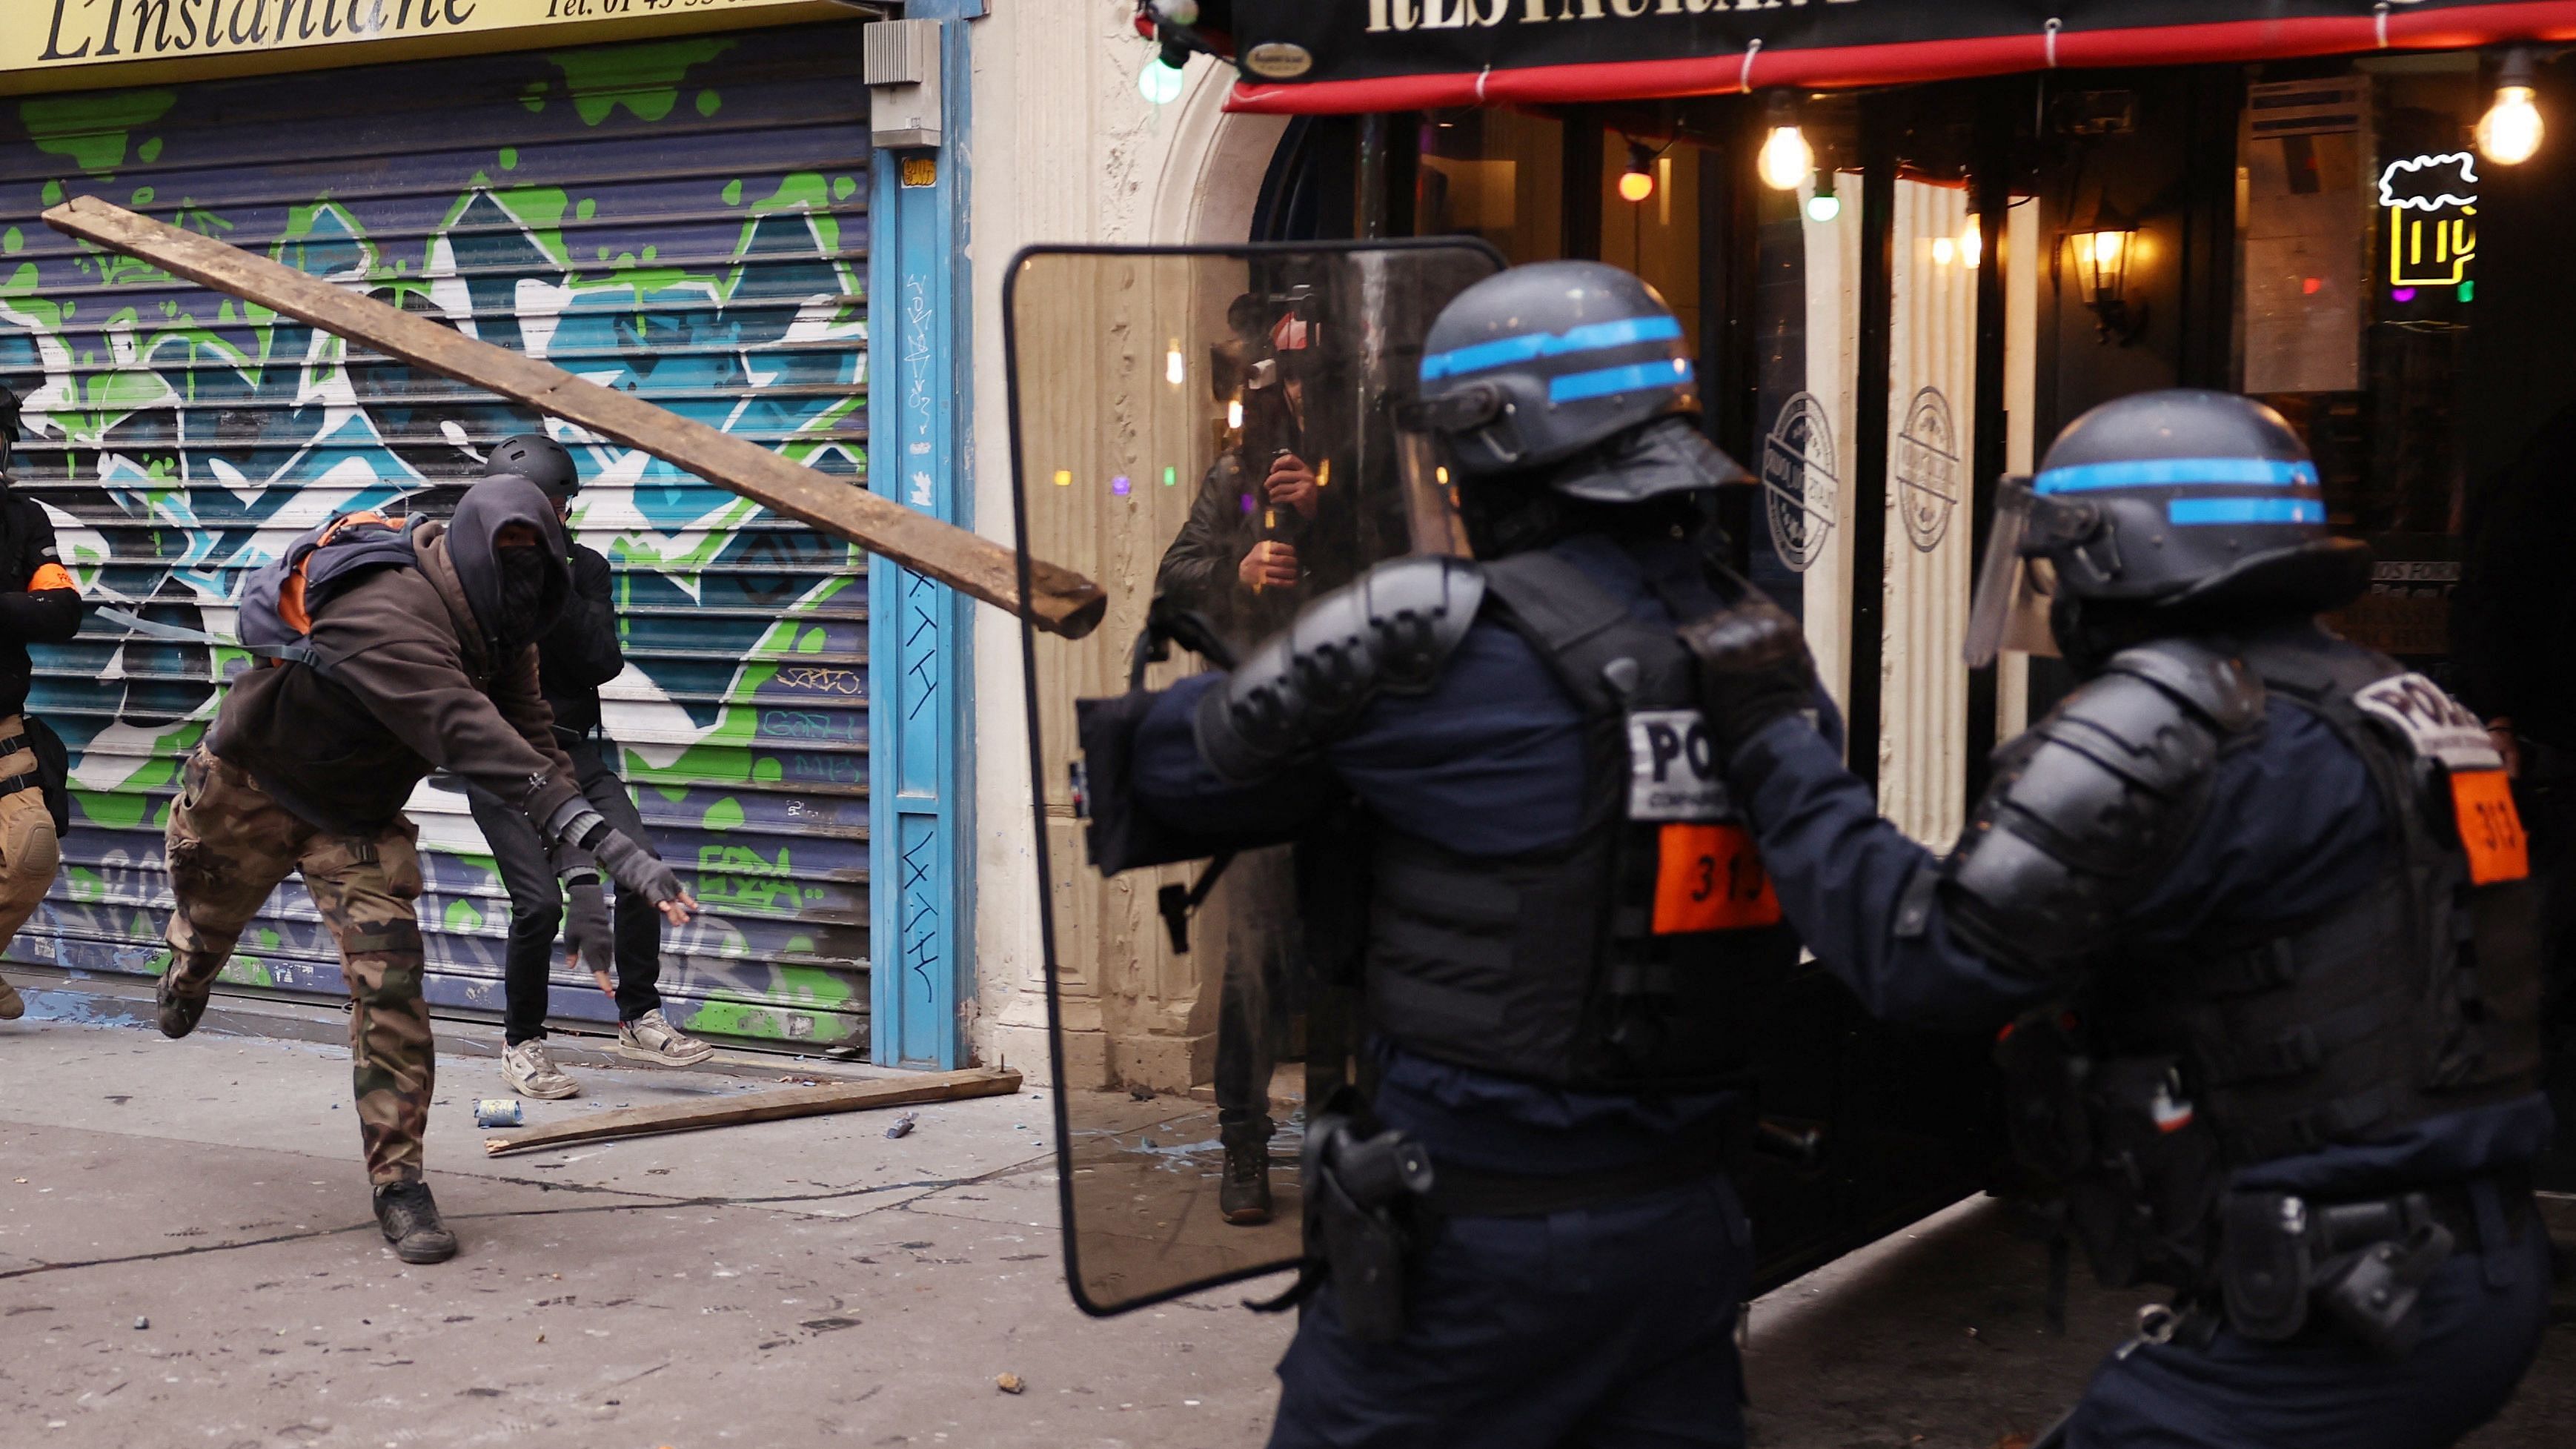 Protester clashes with police during a rally in Paris on January 19, 2023. Credit: AFP Photo